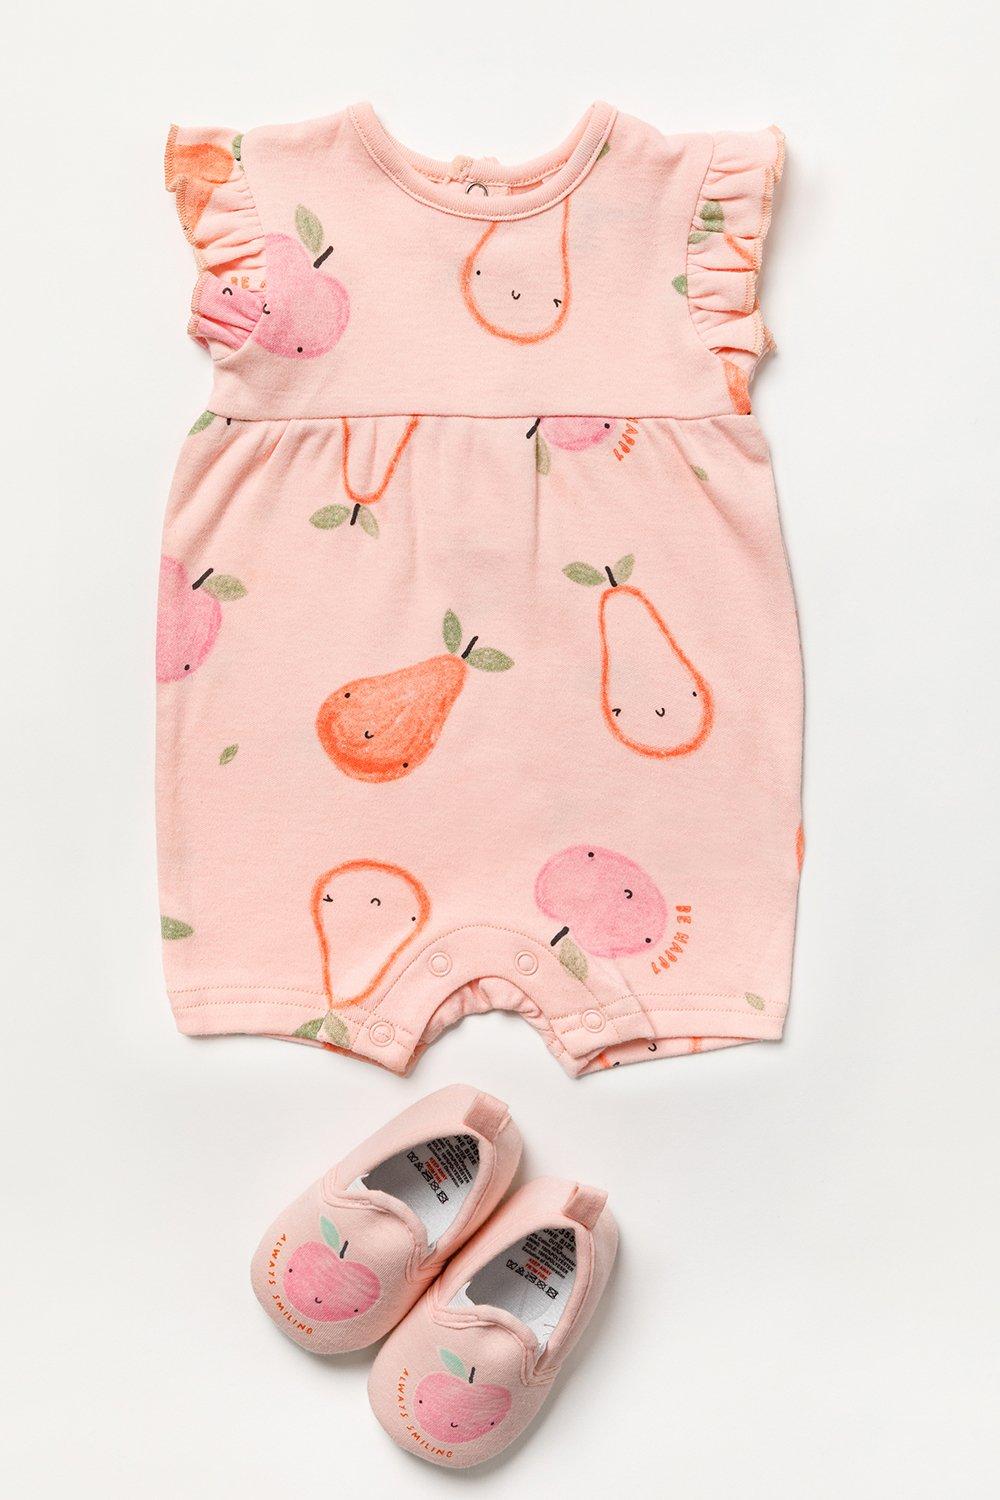 Fruit Print Romper And Shoe Outfit Set